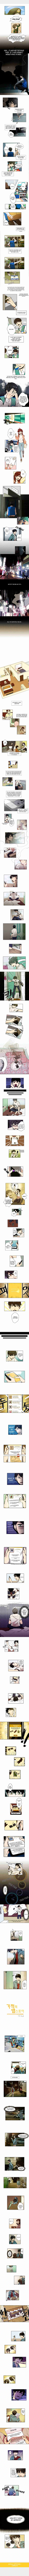 Miracle App Store Ch. 1